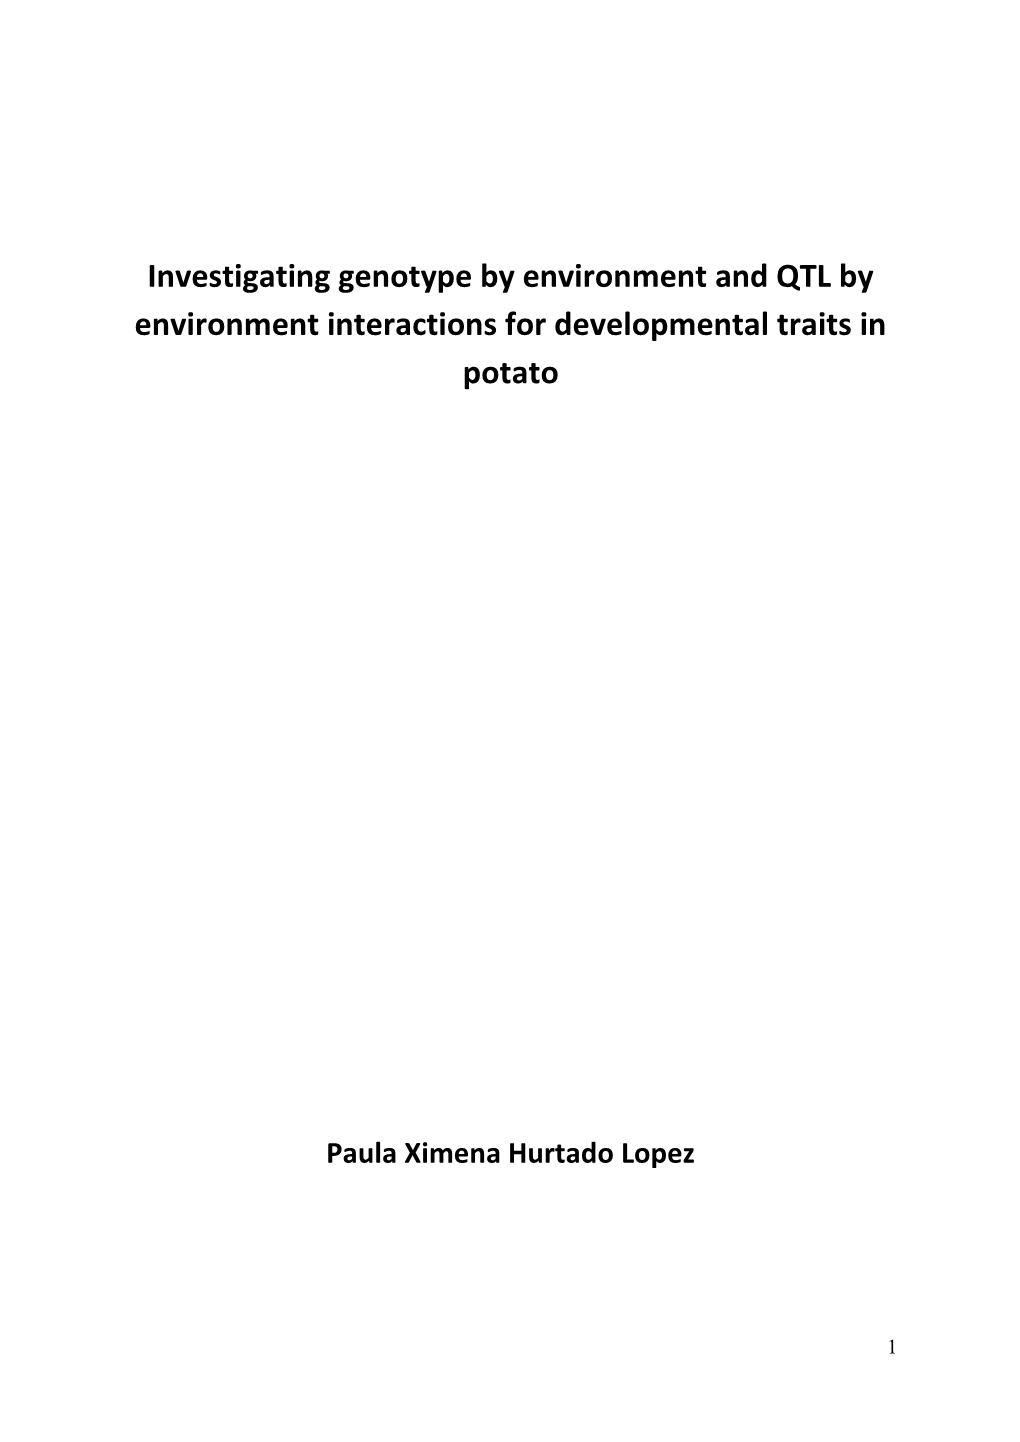 Investigating Genotype by Environment and QTL by Environment Interactions for Developmental Traits in Potato